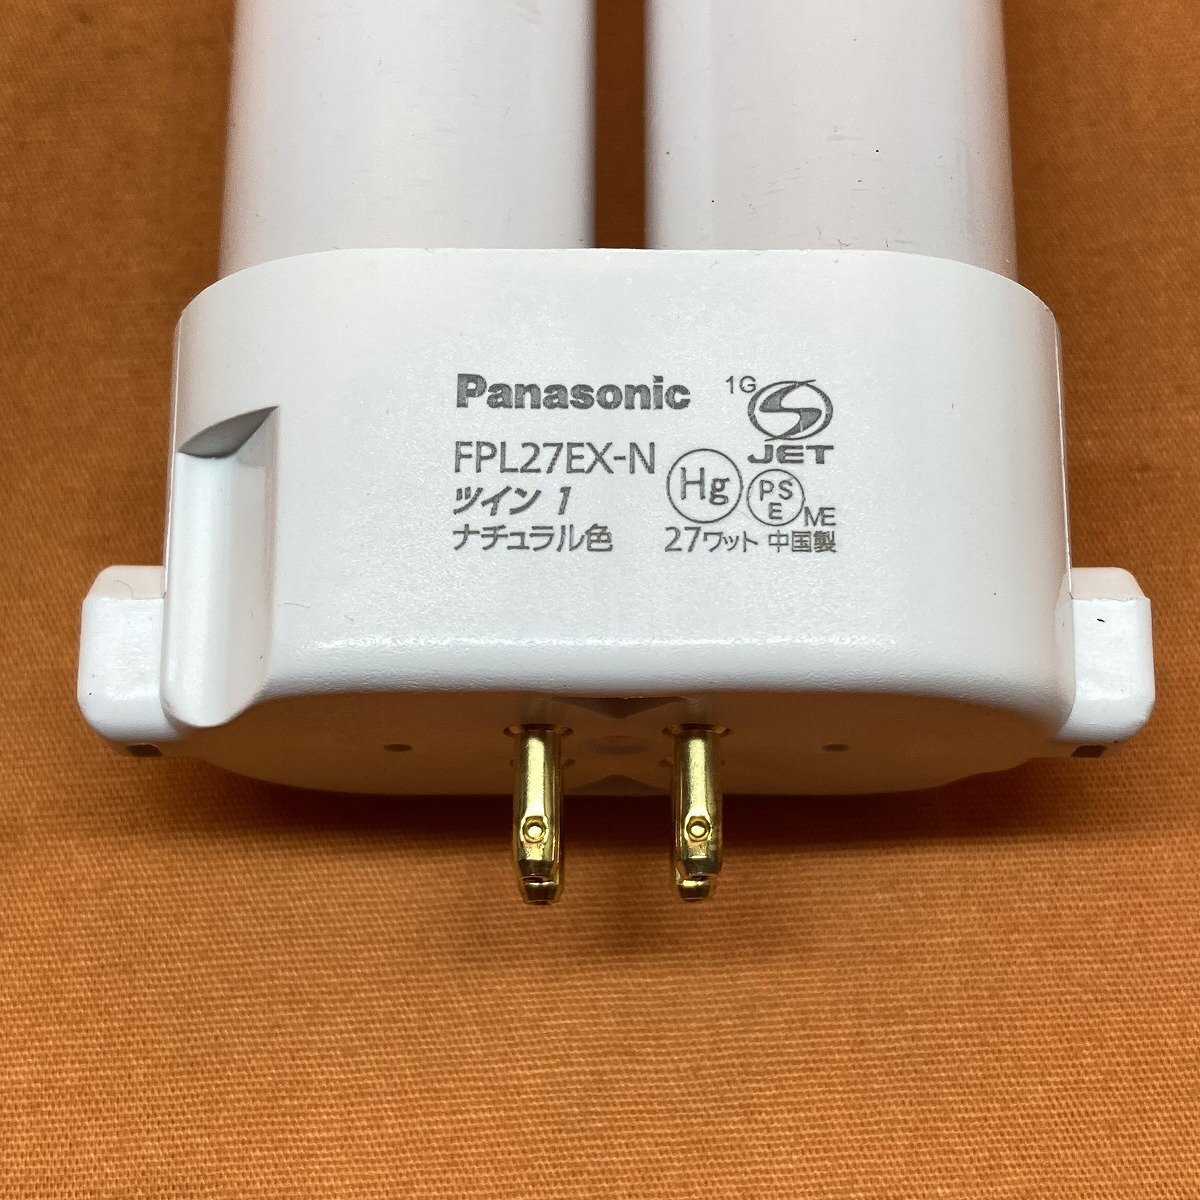  twin fluorescent lamp Panasonic FPL27EX-N daytime white color sa Tey go-